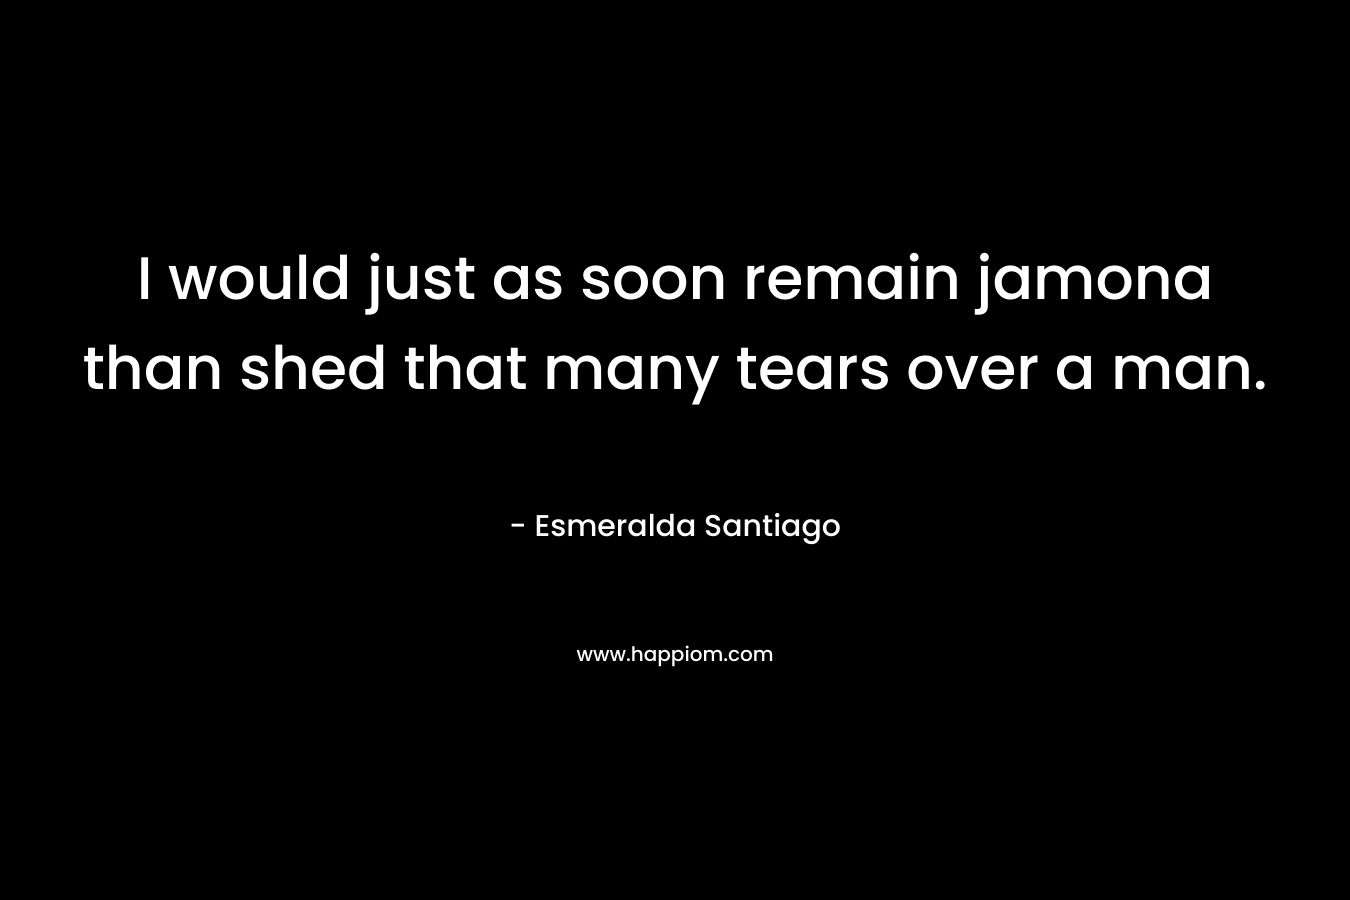 I would just as soon remain jamona than shed that many tears over a man.